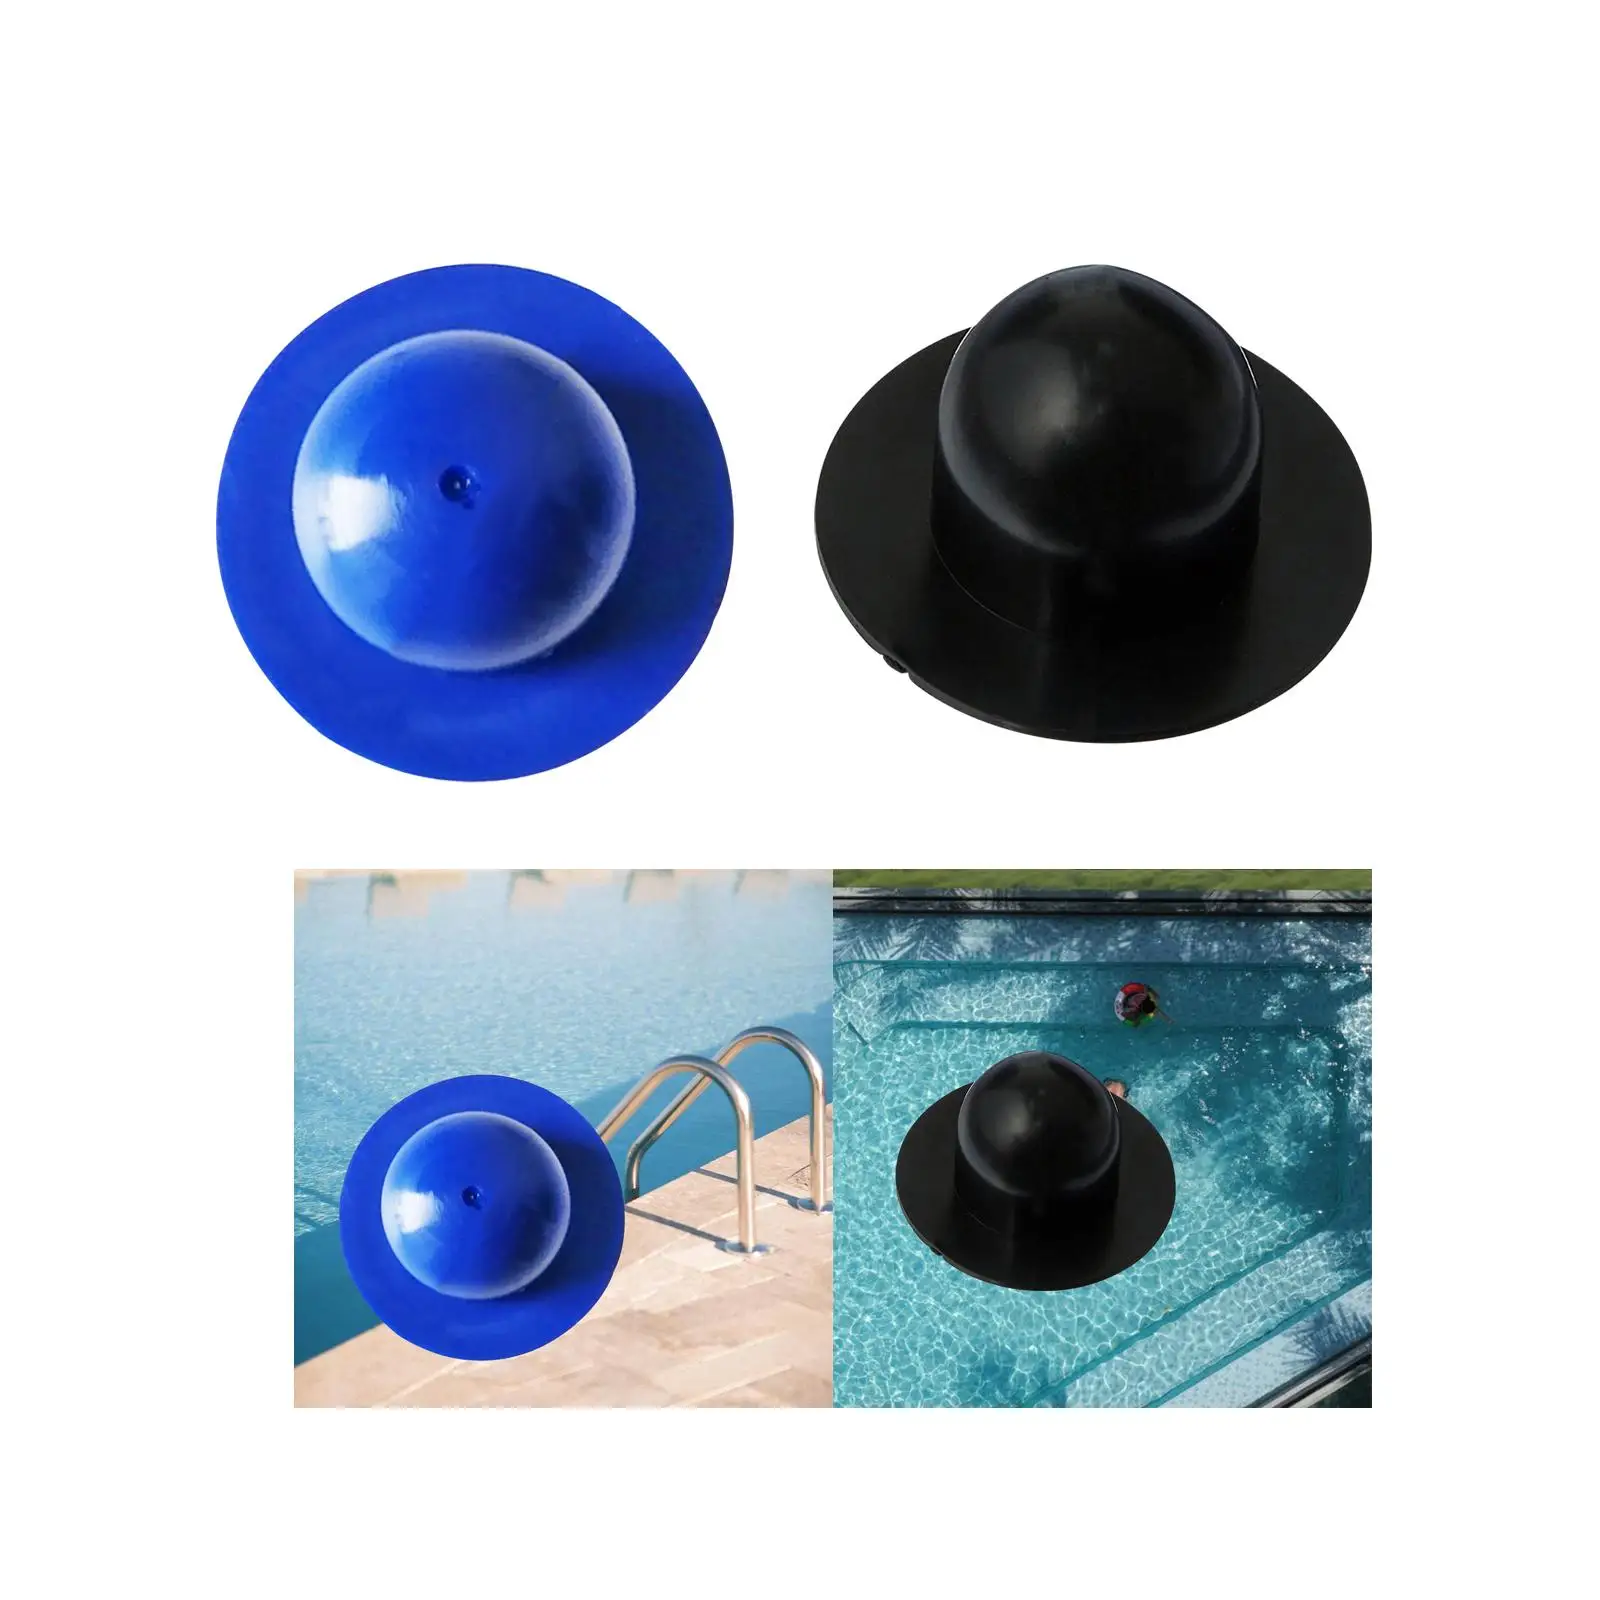 Pool Wall Plugs Filter Pump Stopper Pool Strainer Hose Hole Plug for Inflatable Pool Most above Ground Pools Accessories